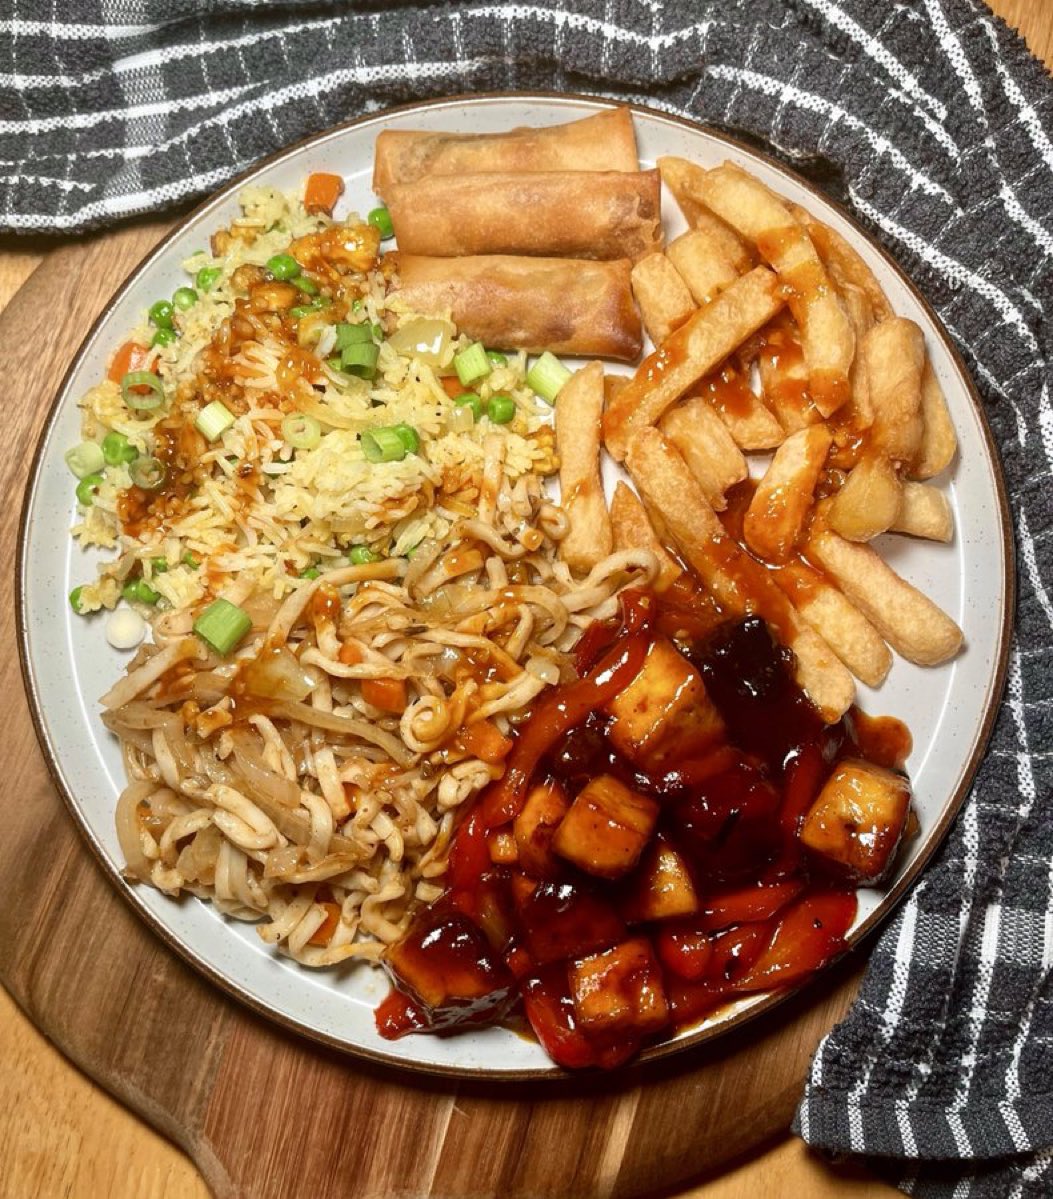 🥡 Homemade Chinese Fakeaway 🥡

Tofu fried rice, beansprout and onion chow mein, vegetable spring rolls, chips, sweet and sour tofu and a chinese bbq sauce 🤩 
#vegan #veganfood #chinesetakeaway #StormDebi